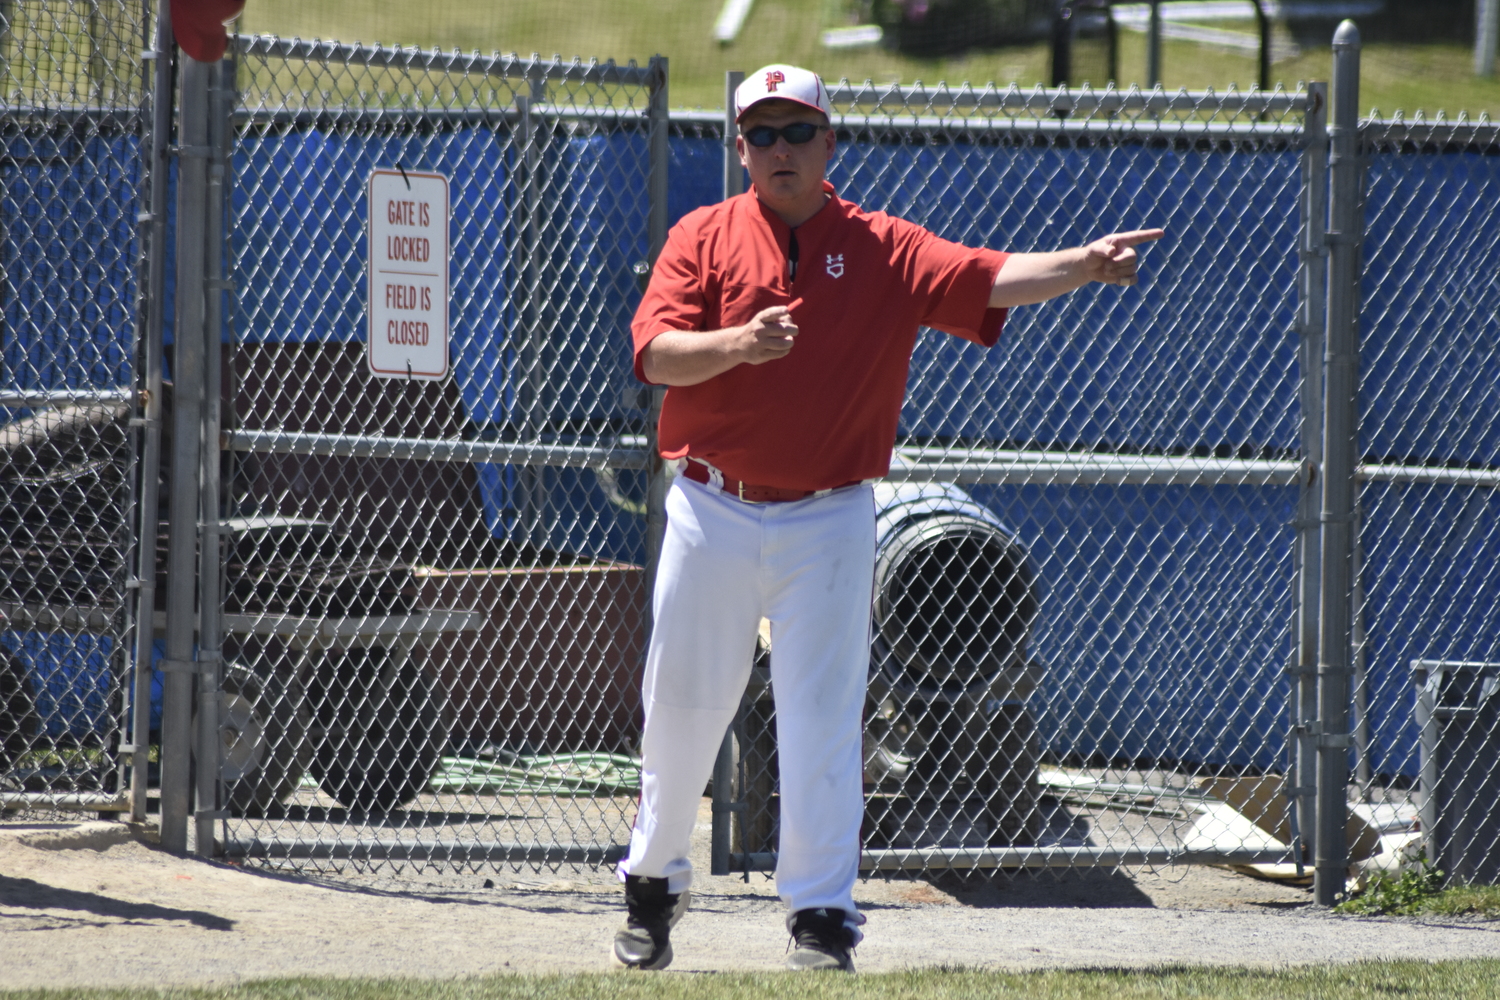 Pierson head coach Bob Manning asks the home plate umpire of the previous pitch location.  DREW BUDD